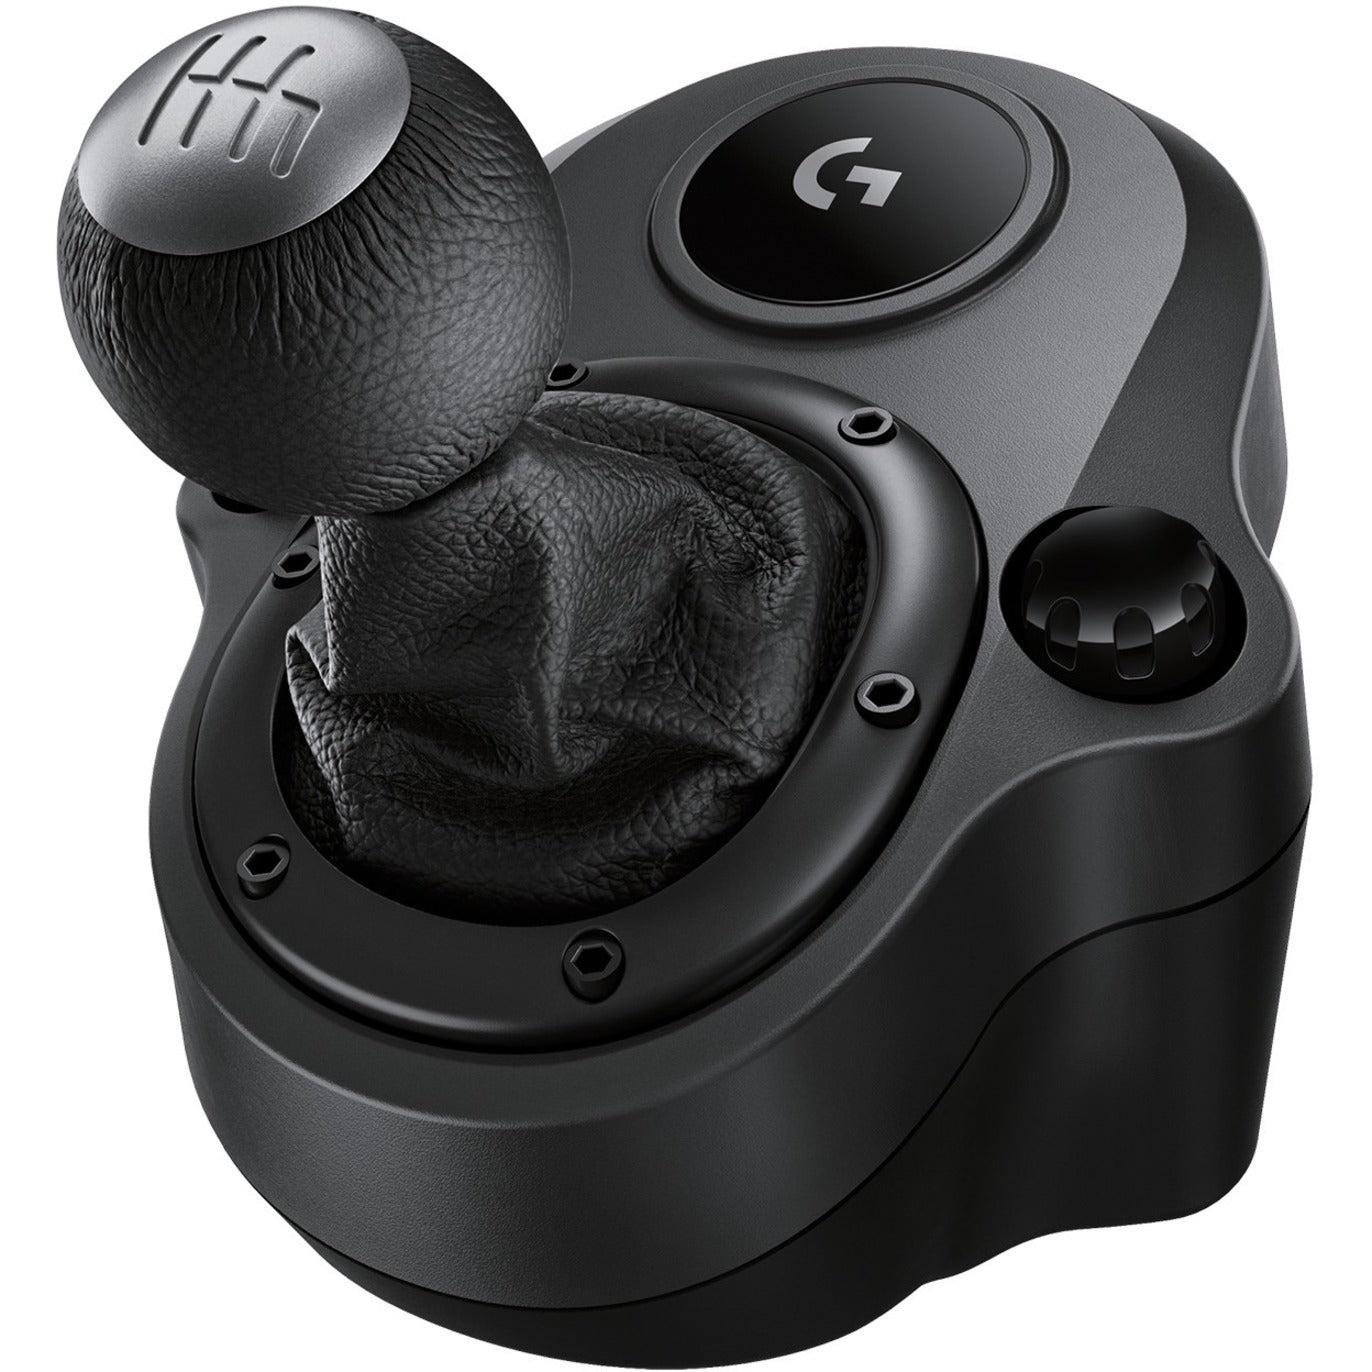 Logitech 941-000119 Driving Force Shifter For G923, G29 and G920 Racing Wheels, Gaming Gear Shifter